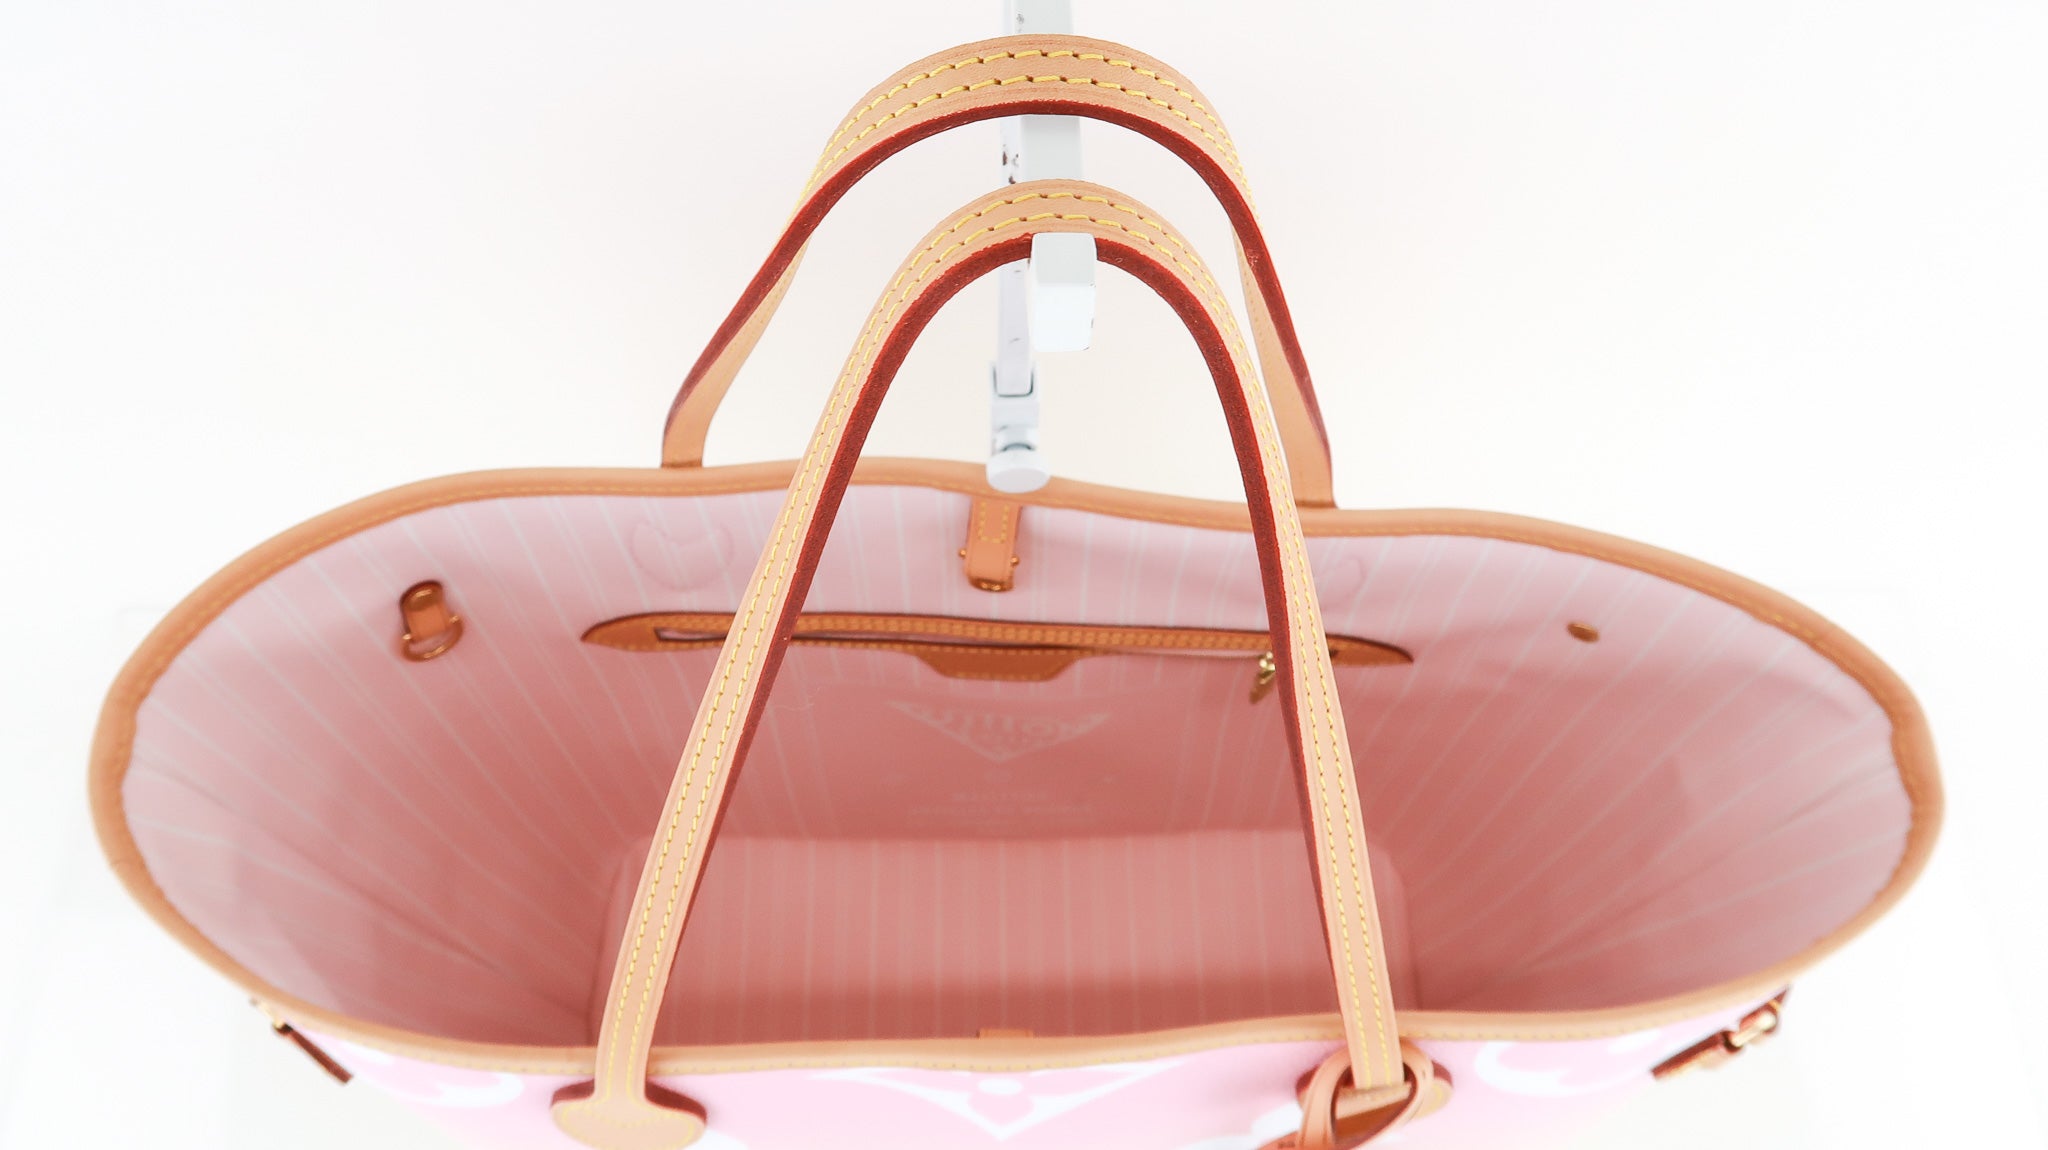 Louis Vuitton Light Pink By The Pool Giant Monogram Neverfull MM